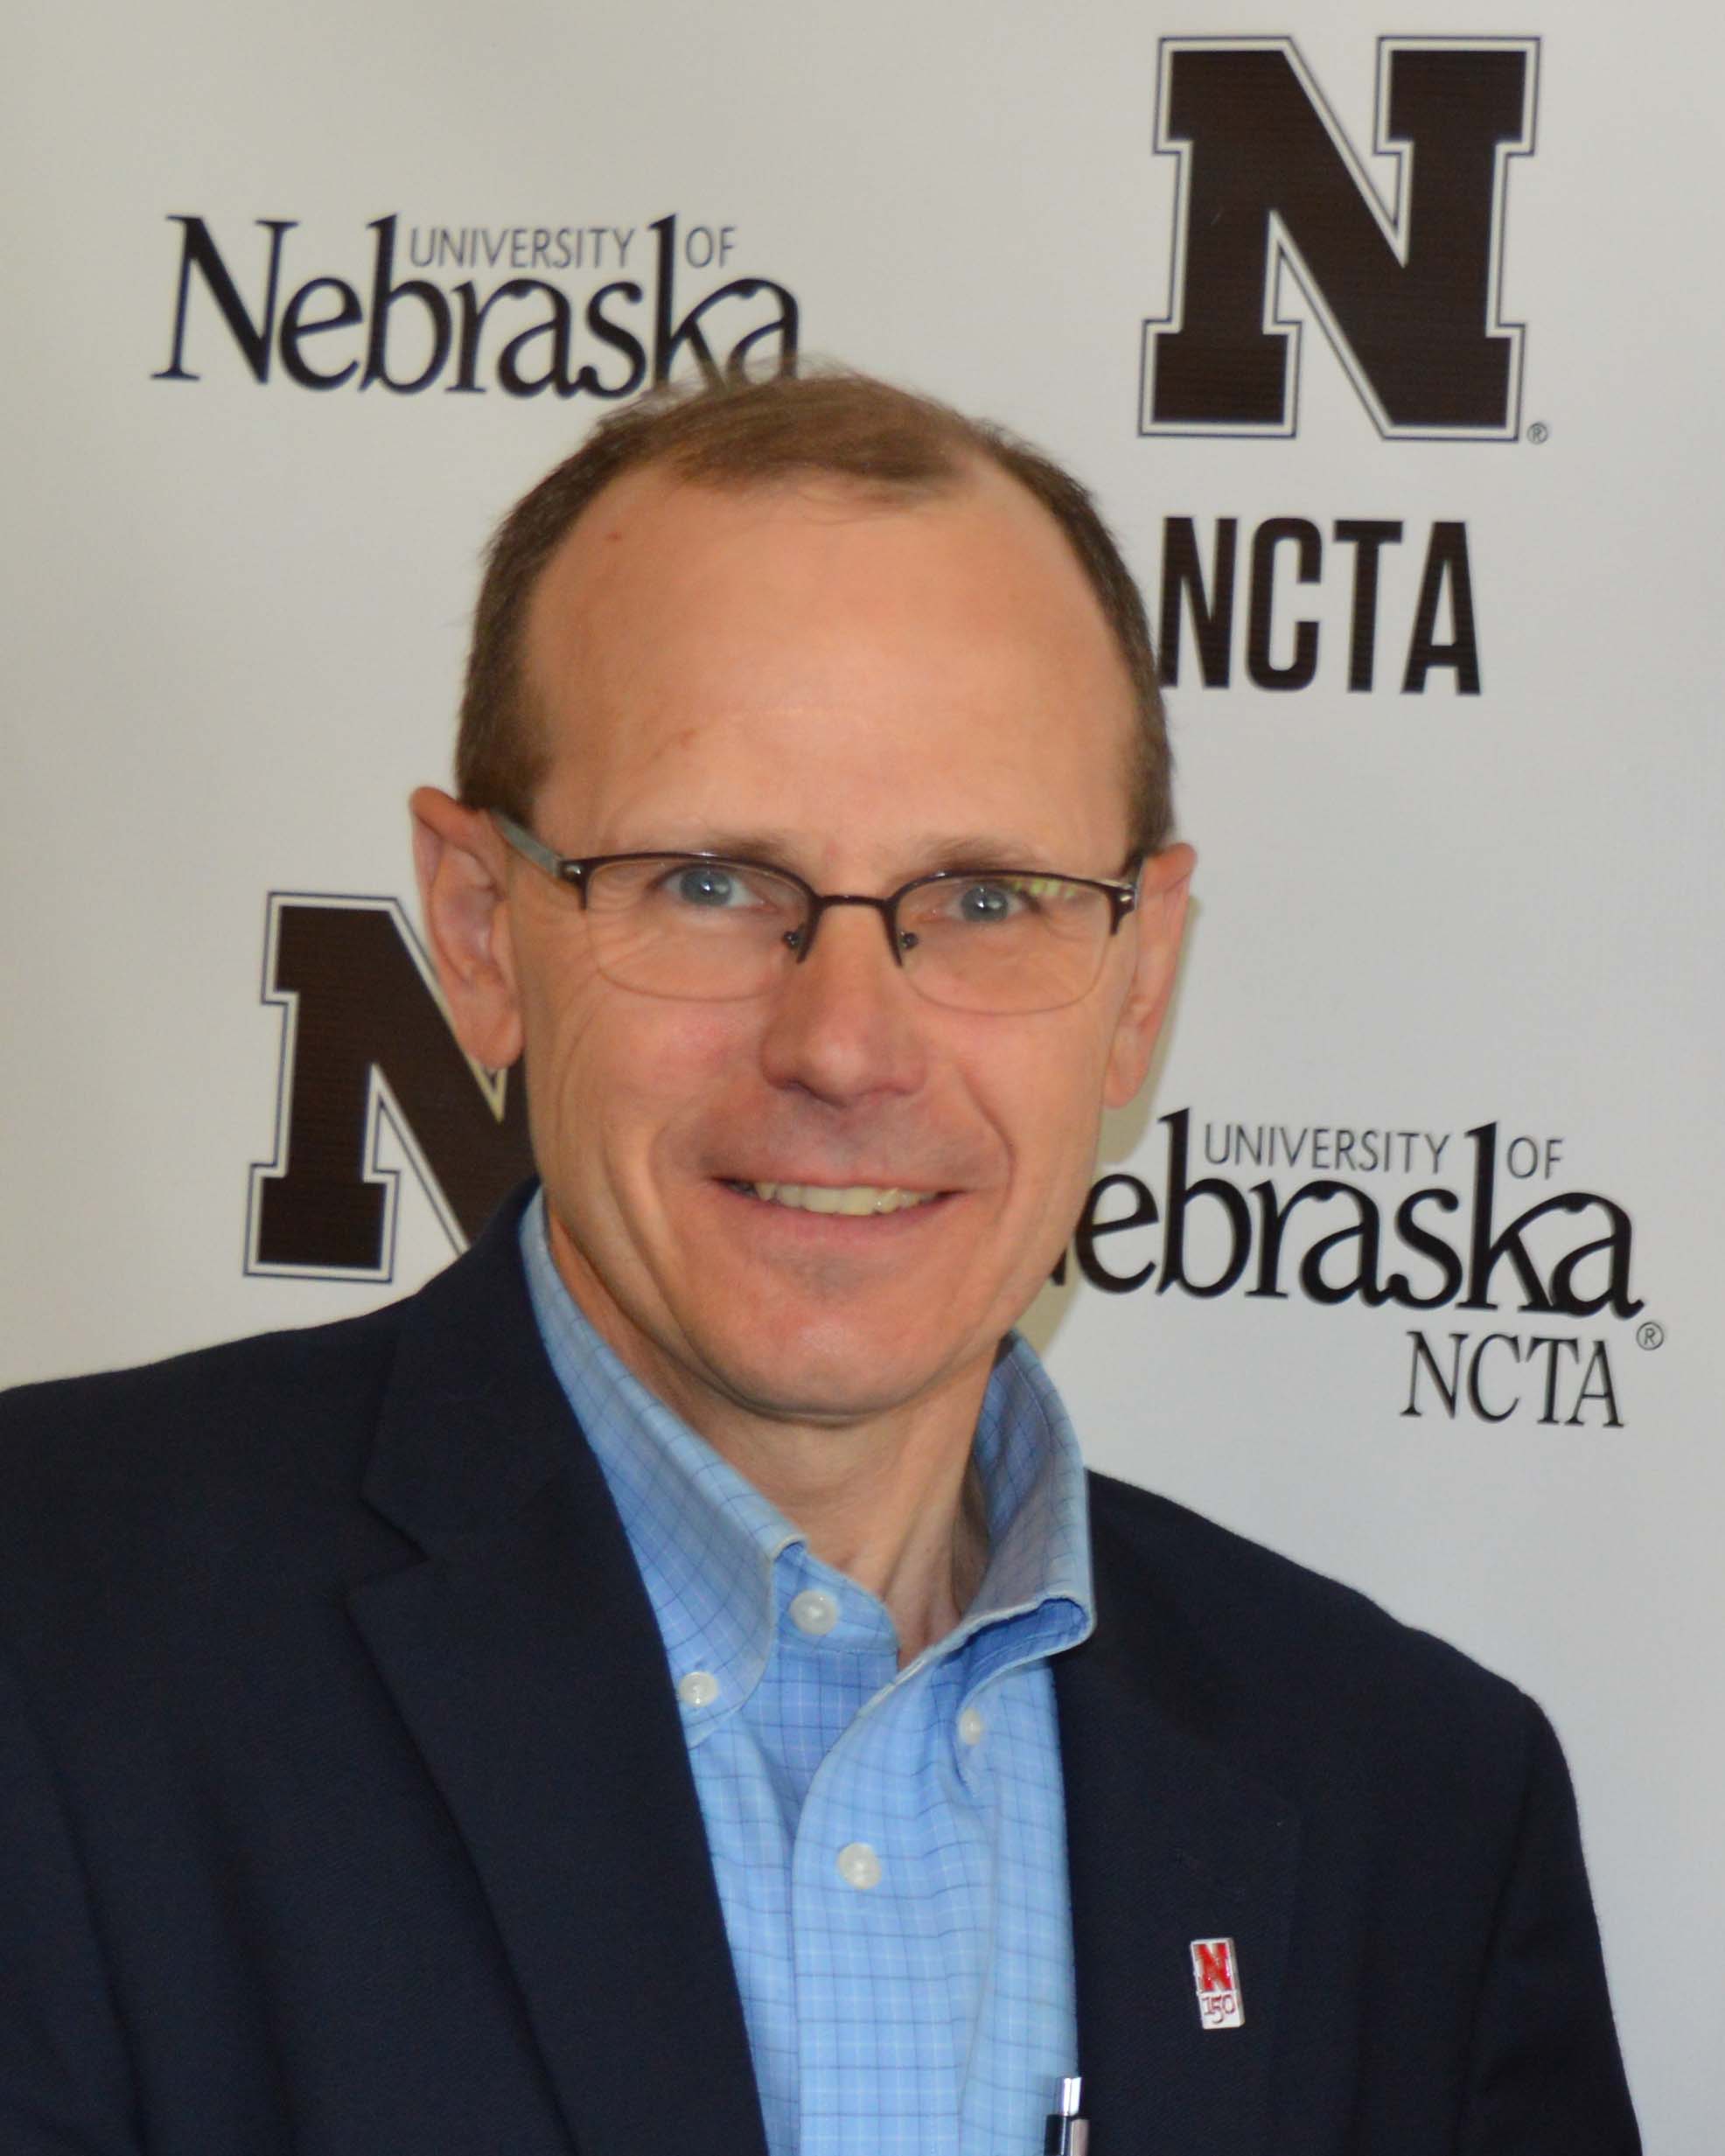 Kelly Bruns, Ph.D., is the interim dean of the Nebraska College of Technical Agriculture in Curtis. His doctorate is in animal science and research. He is director of the University of Nebraska's West Central Research & Extension Center at North Platte.